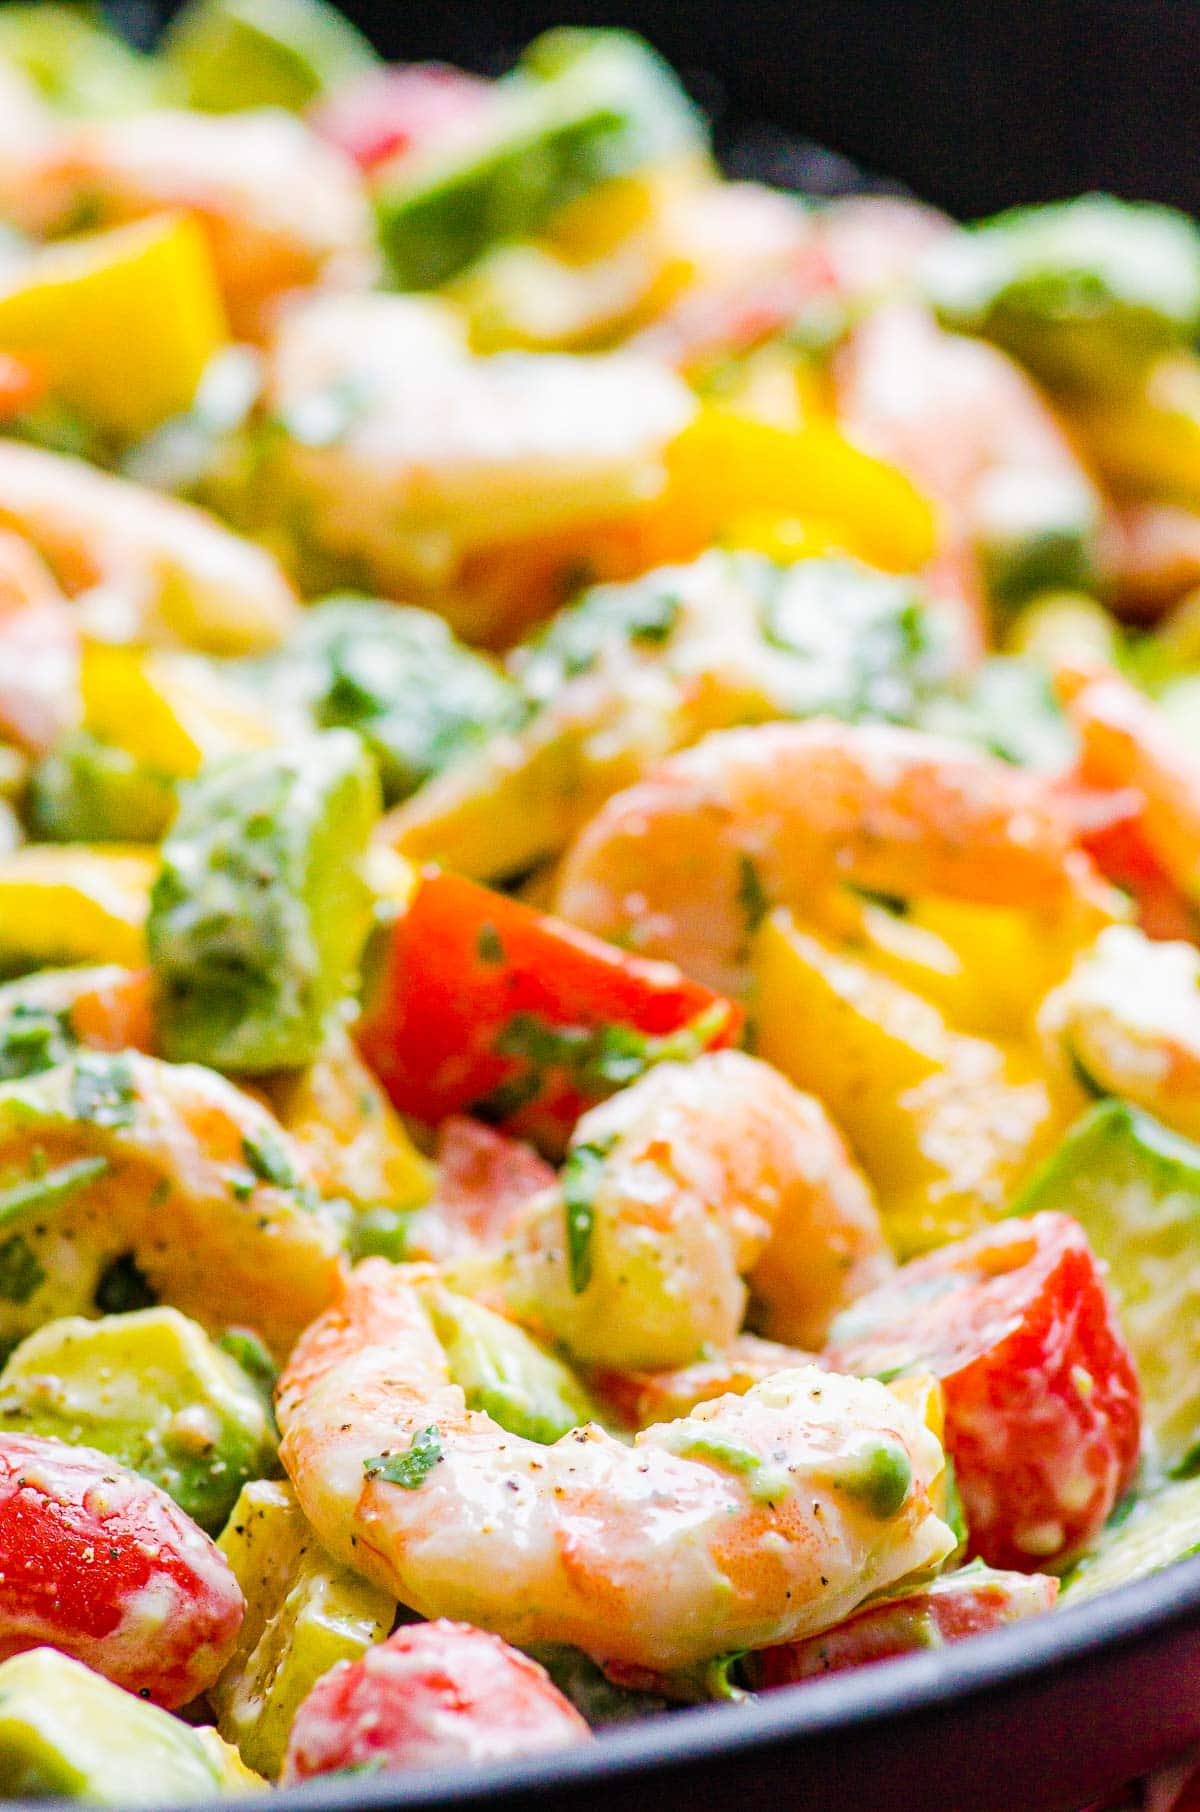 Closeup shrimp and avocado salad with tomatoes, peppers and creamy yogurt dressing.